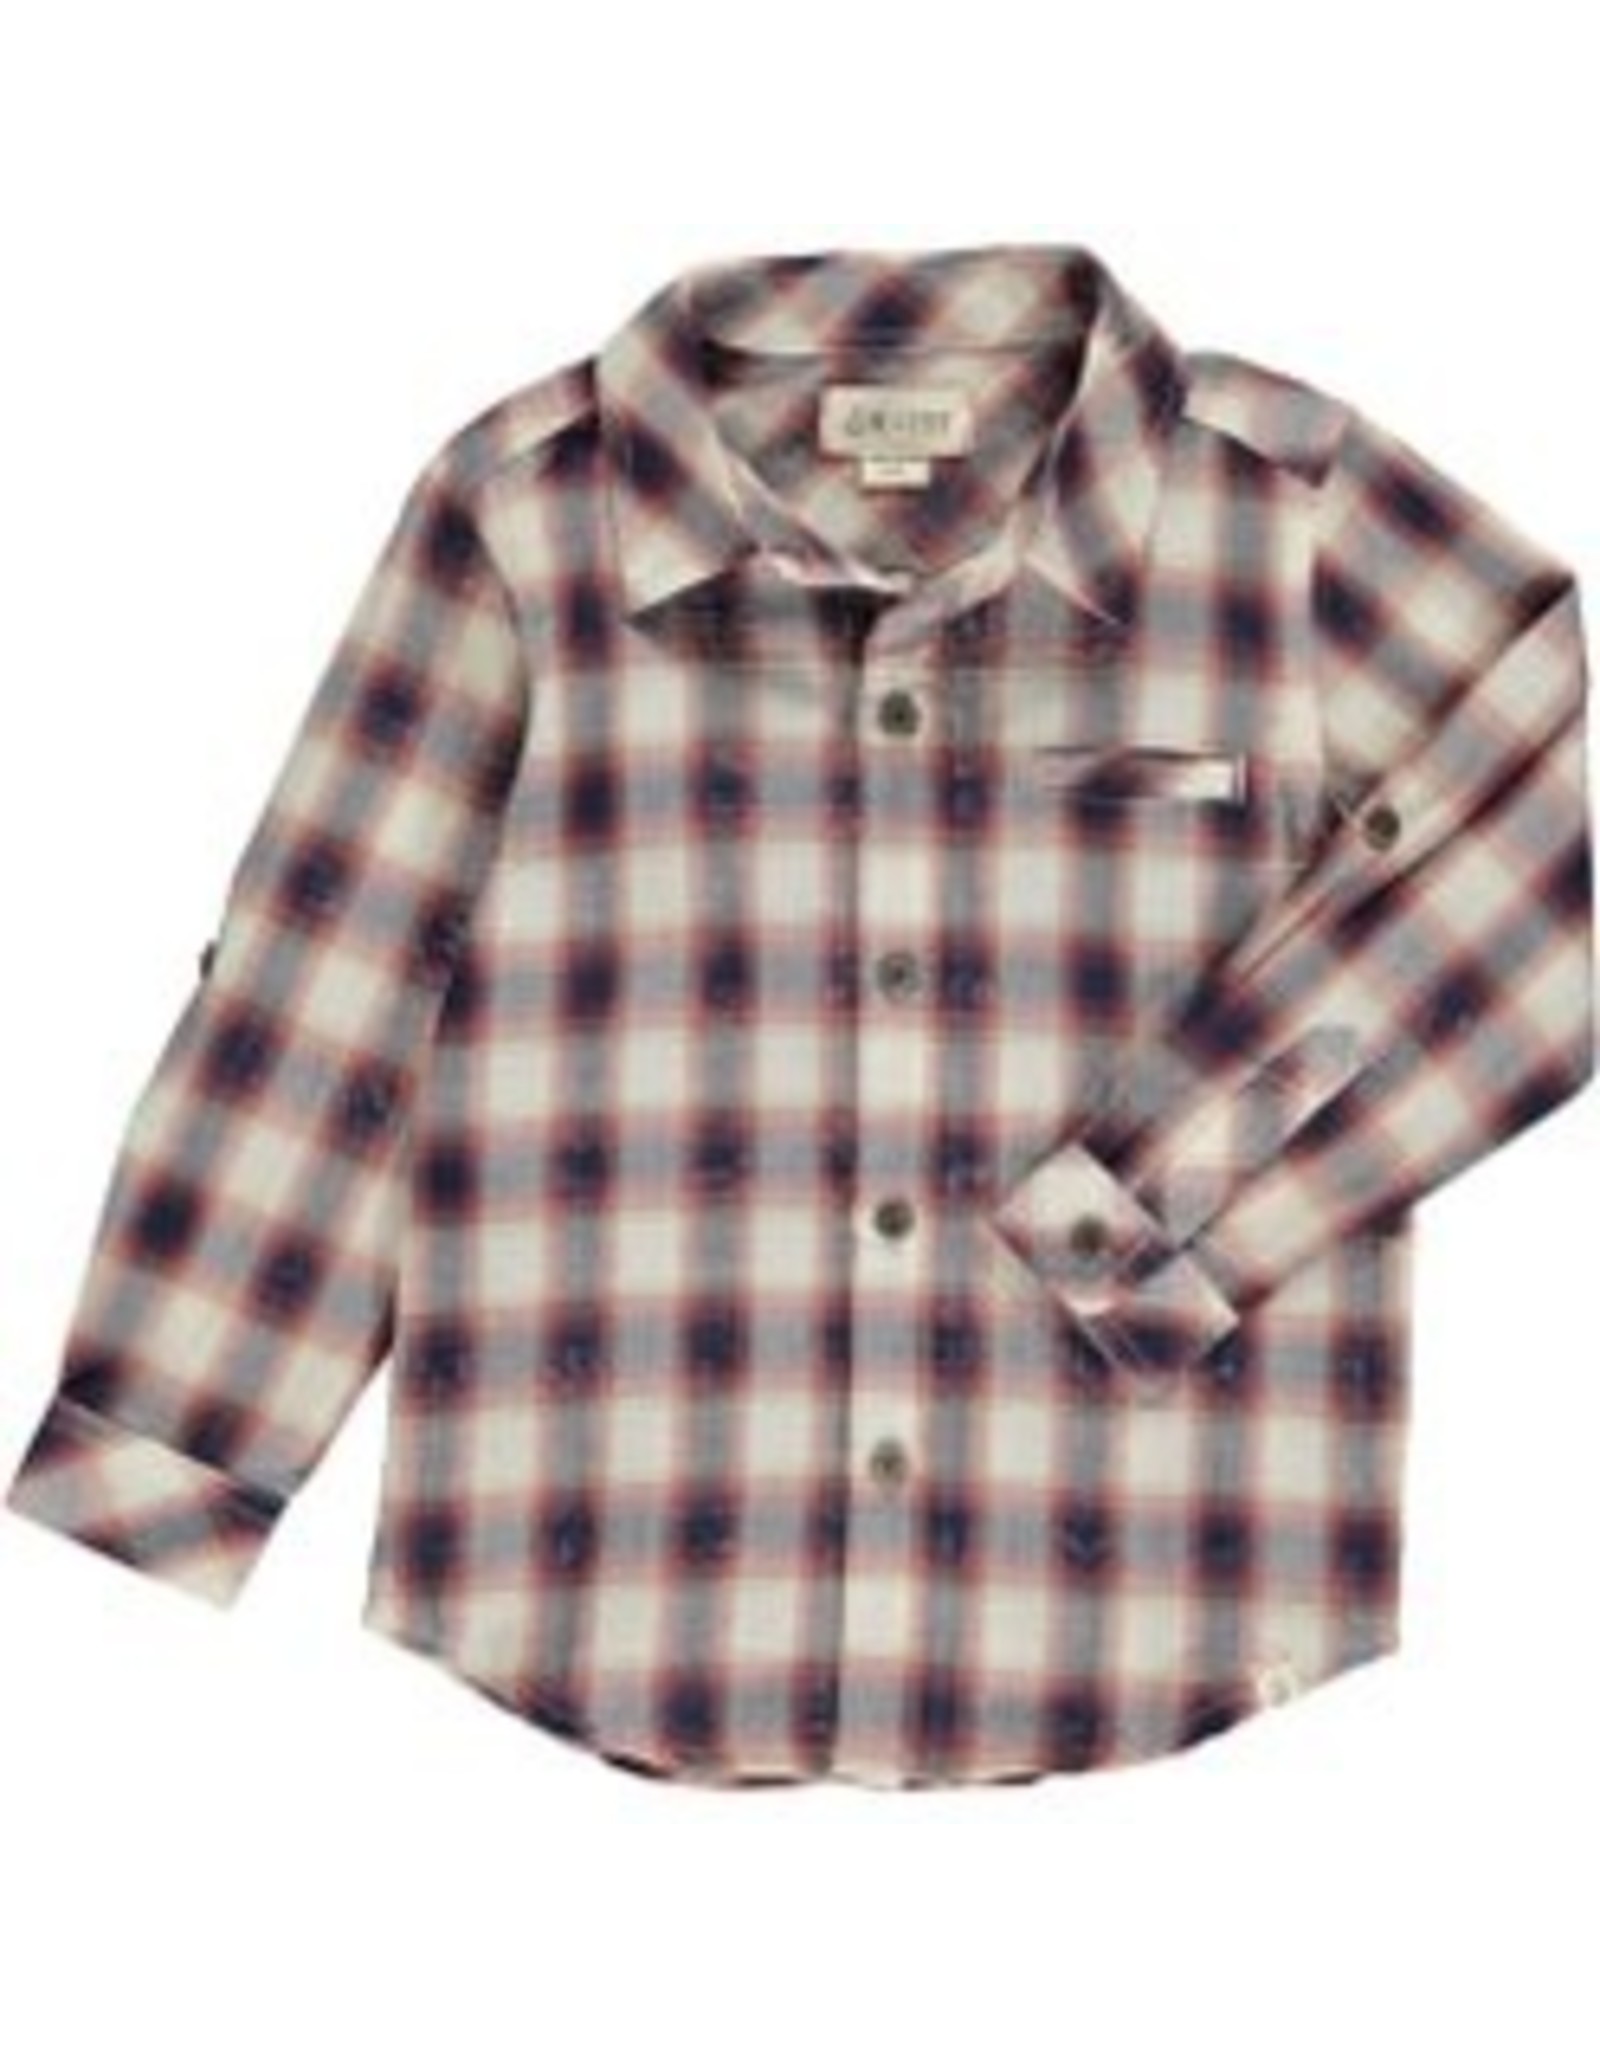 Me & Henry Atwood Woven Shirt - Navy/Red/Cream Plaid